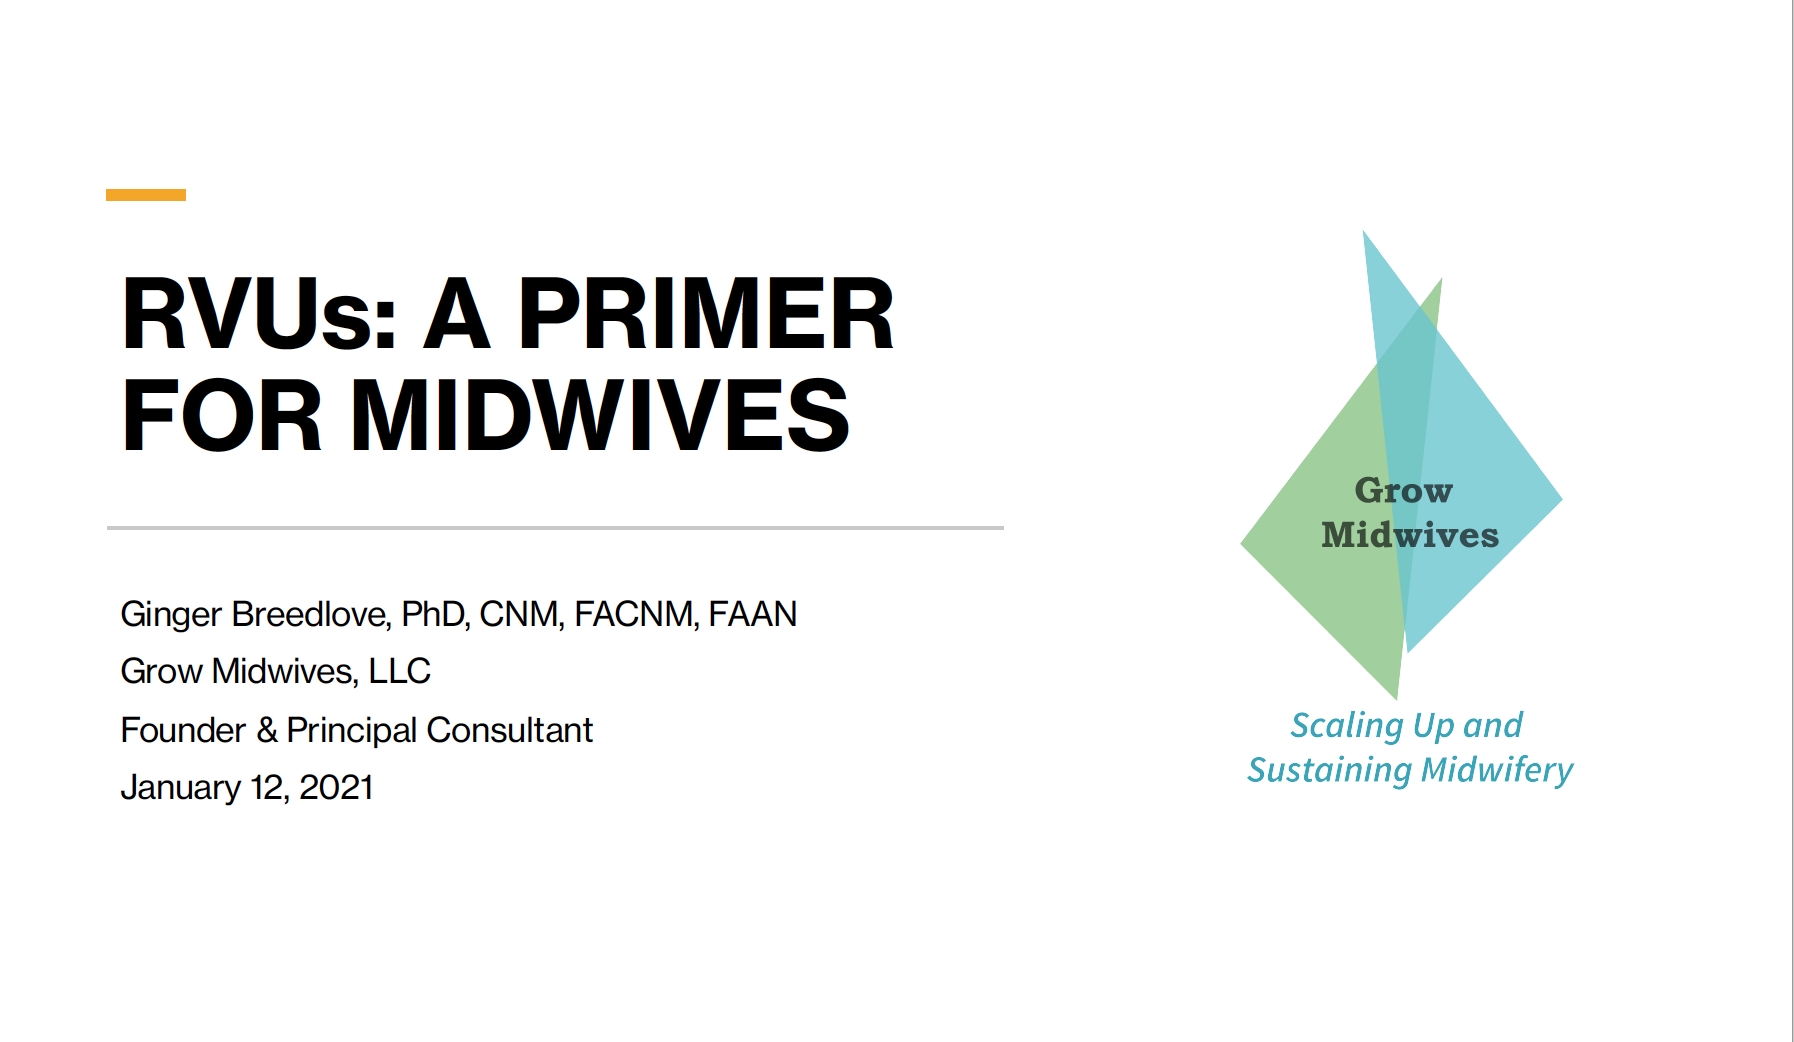 RVUs a Primer for Midwives | Grow Midwives